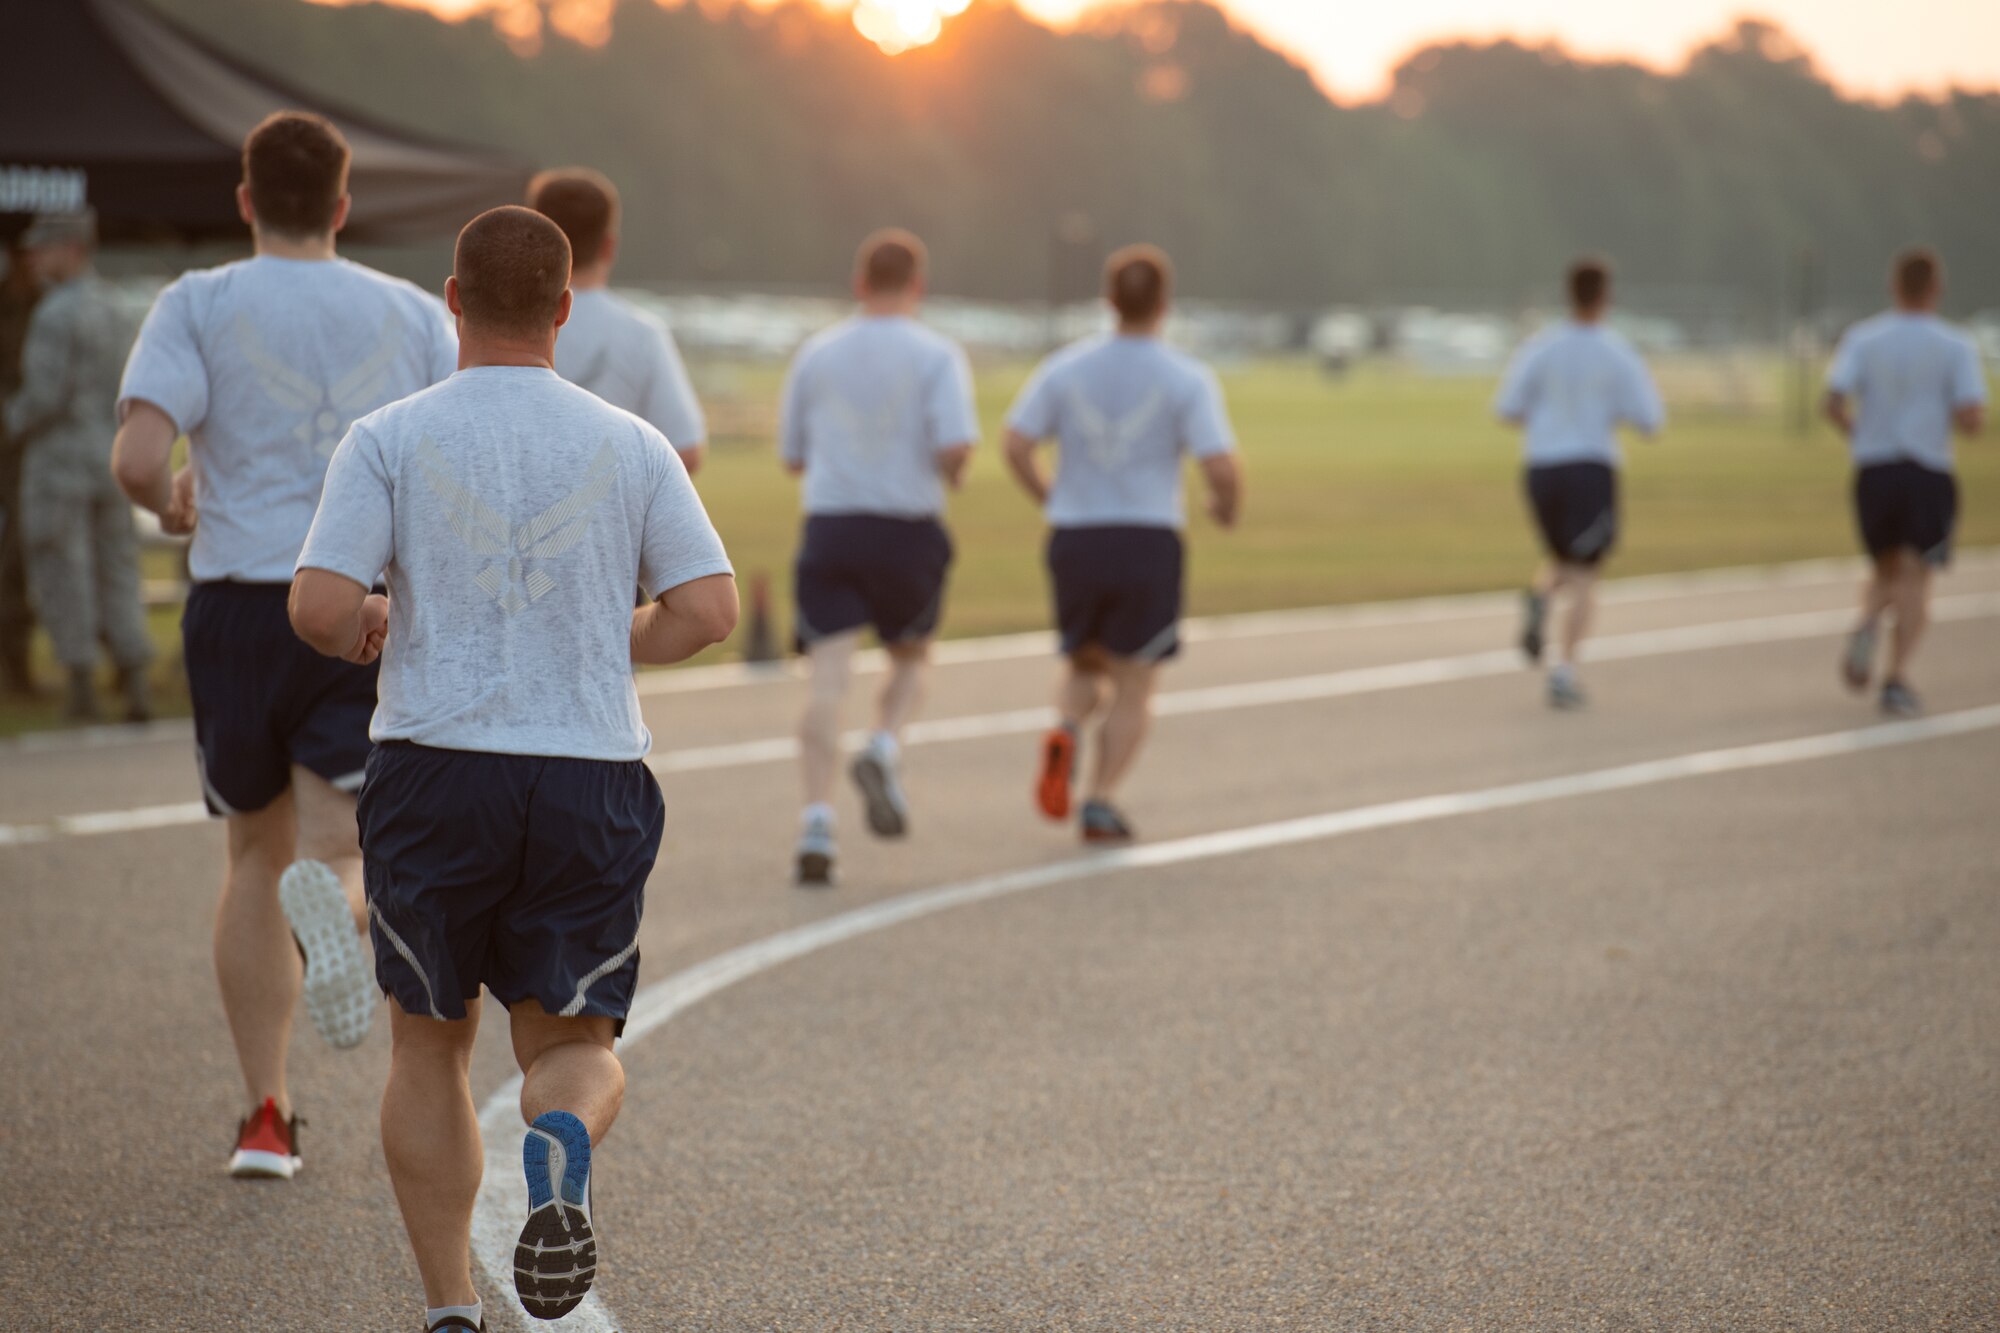 Officer Training School trainees run during an official Air Force Physical Training test on Aug. 8, 2019, at Maxwell Air Force Base, Ala. USAF photo by Airman 1st Class Charles Welty